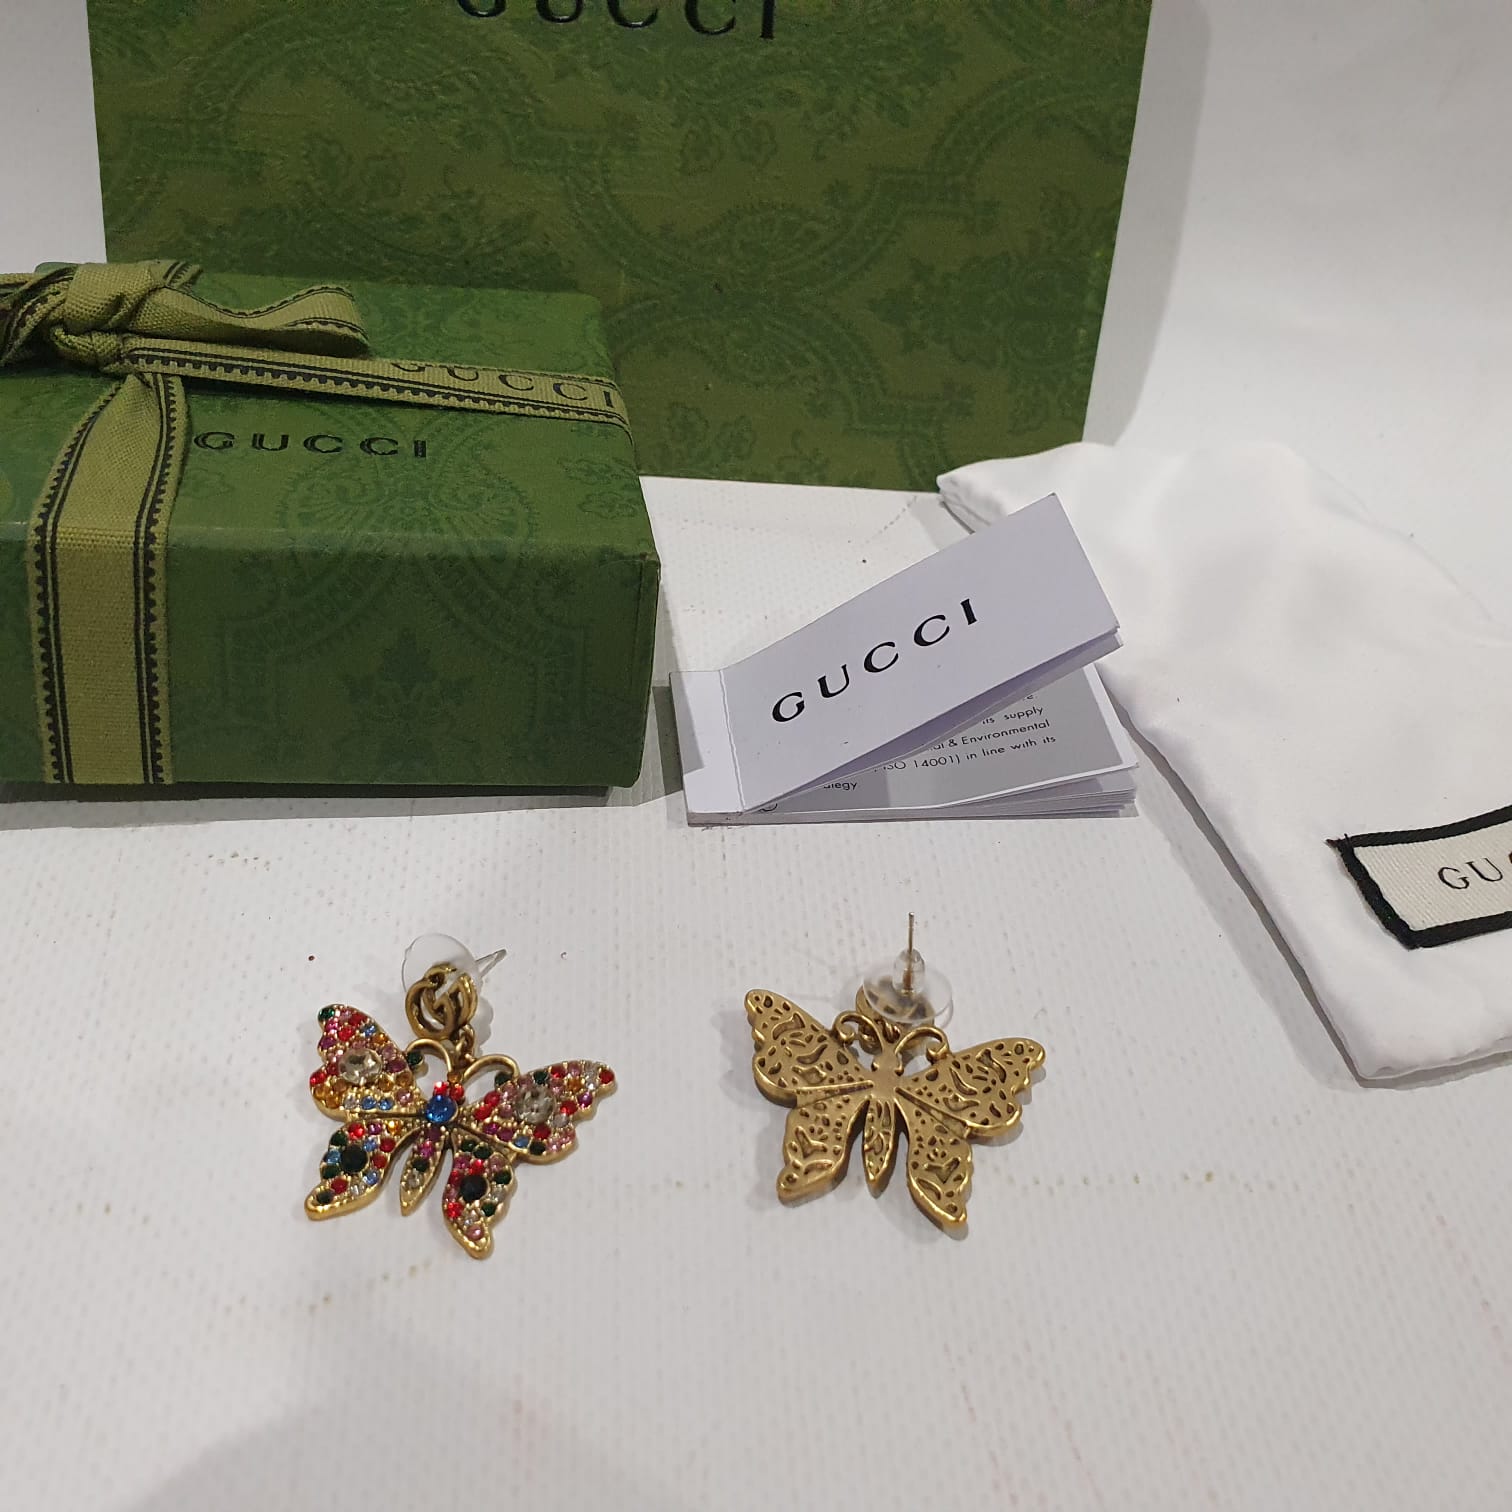 Gucci Necklace and Earrings